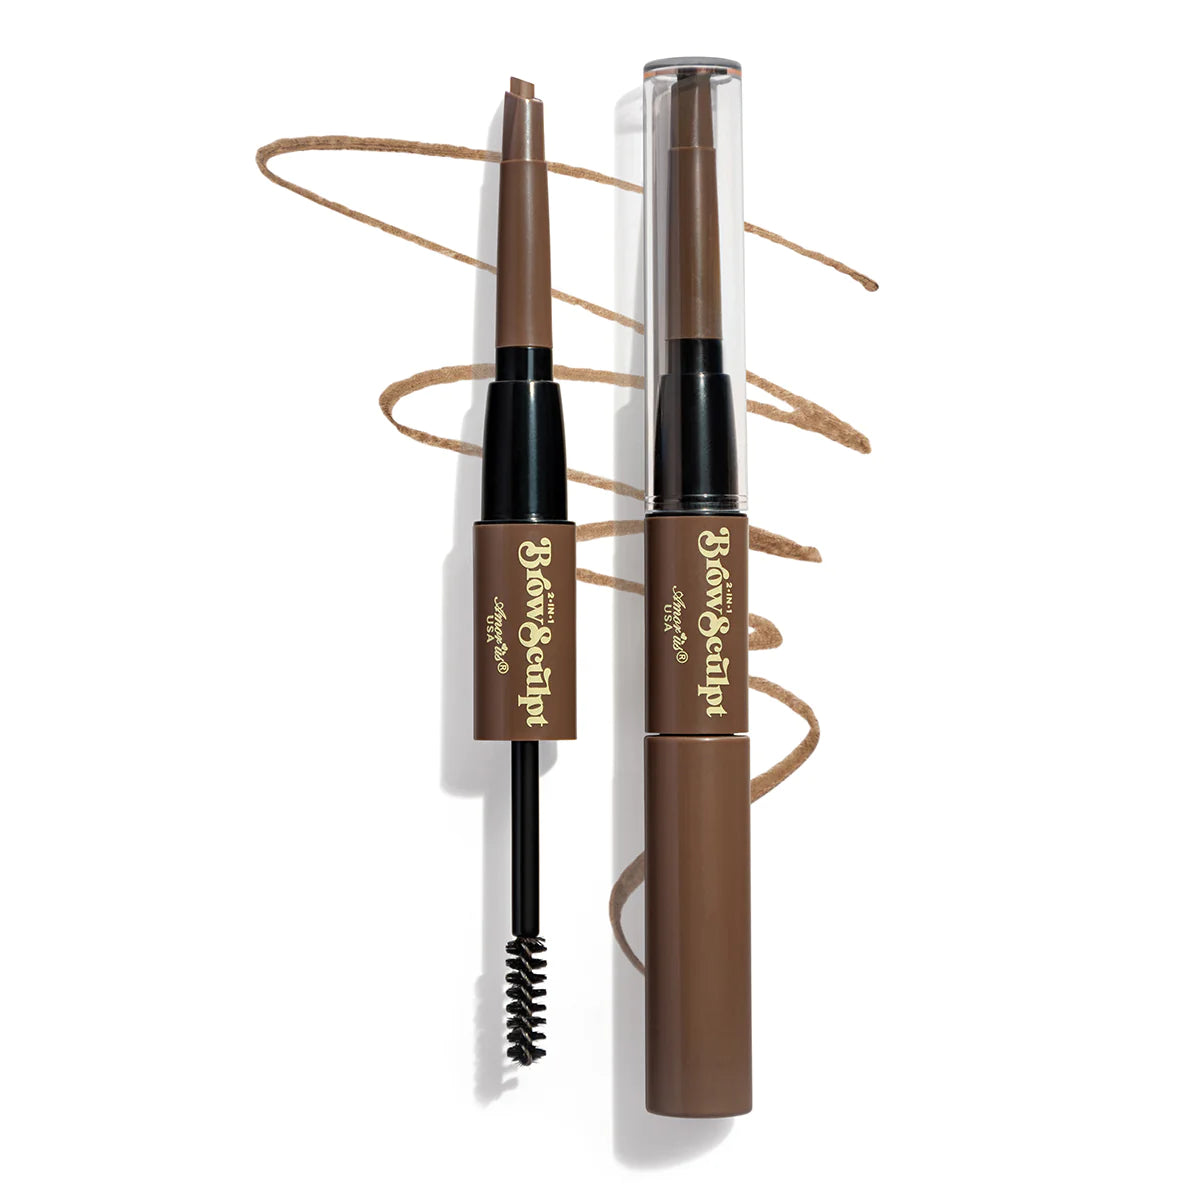 CO-BSED AmorUs 2 in 1 Brow Sculpt Pencil & Tinted Brow Gel Display